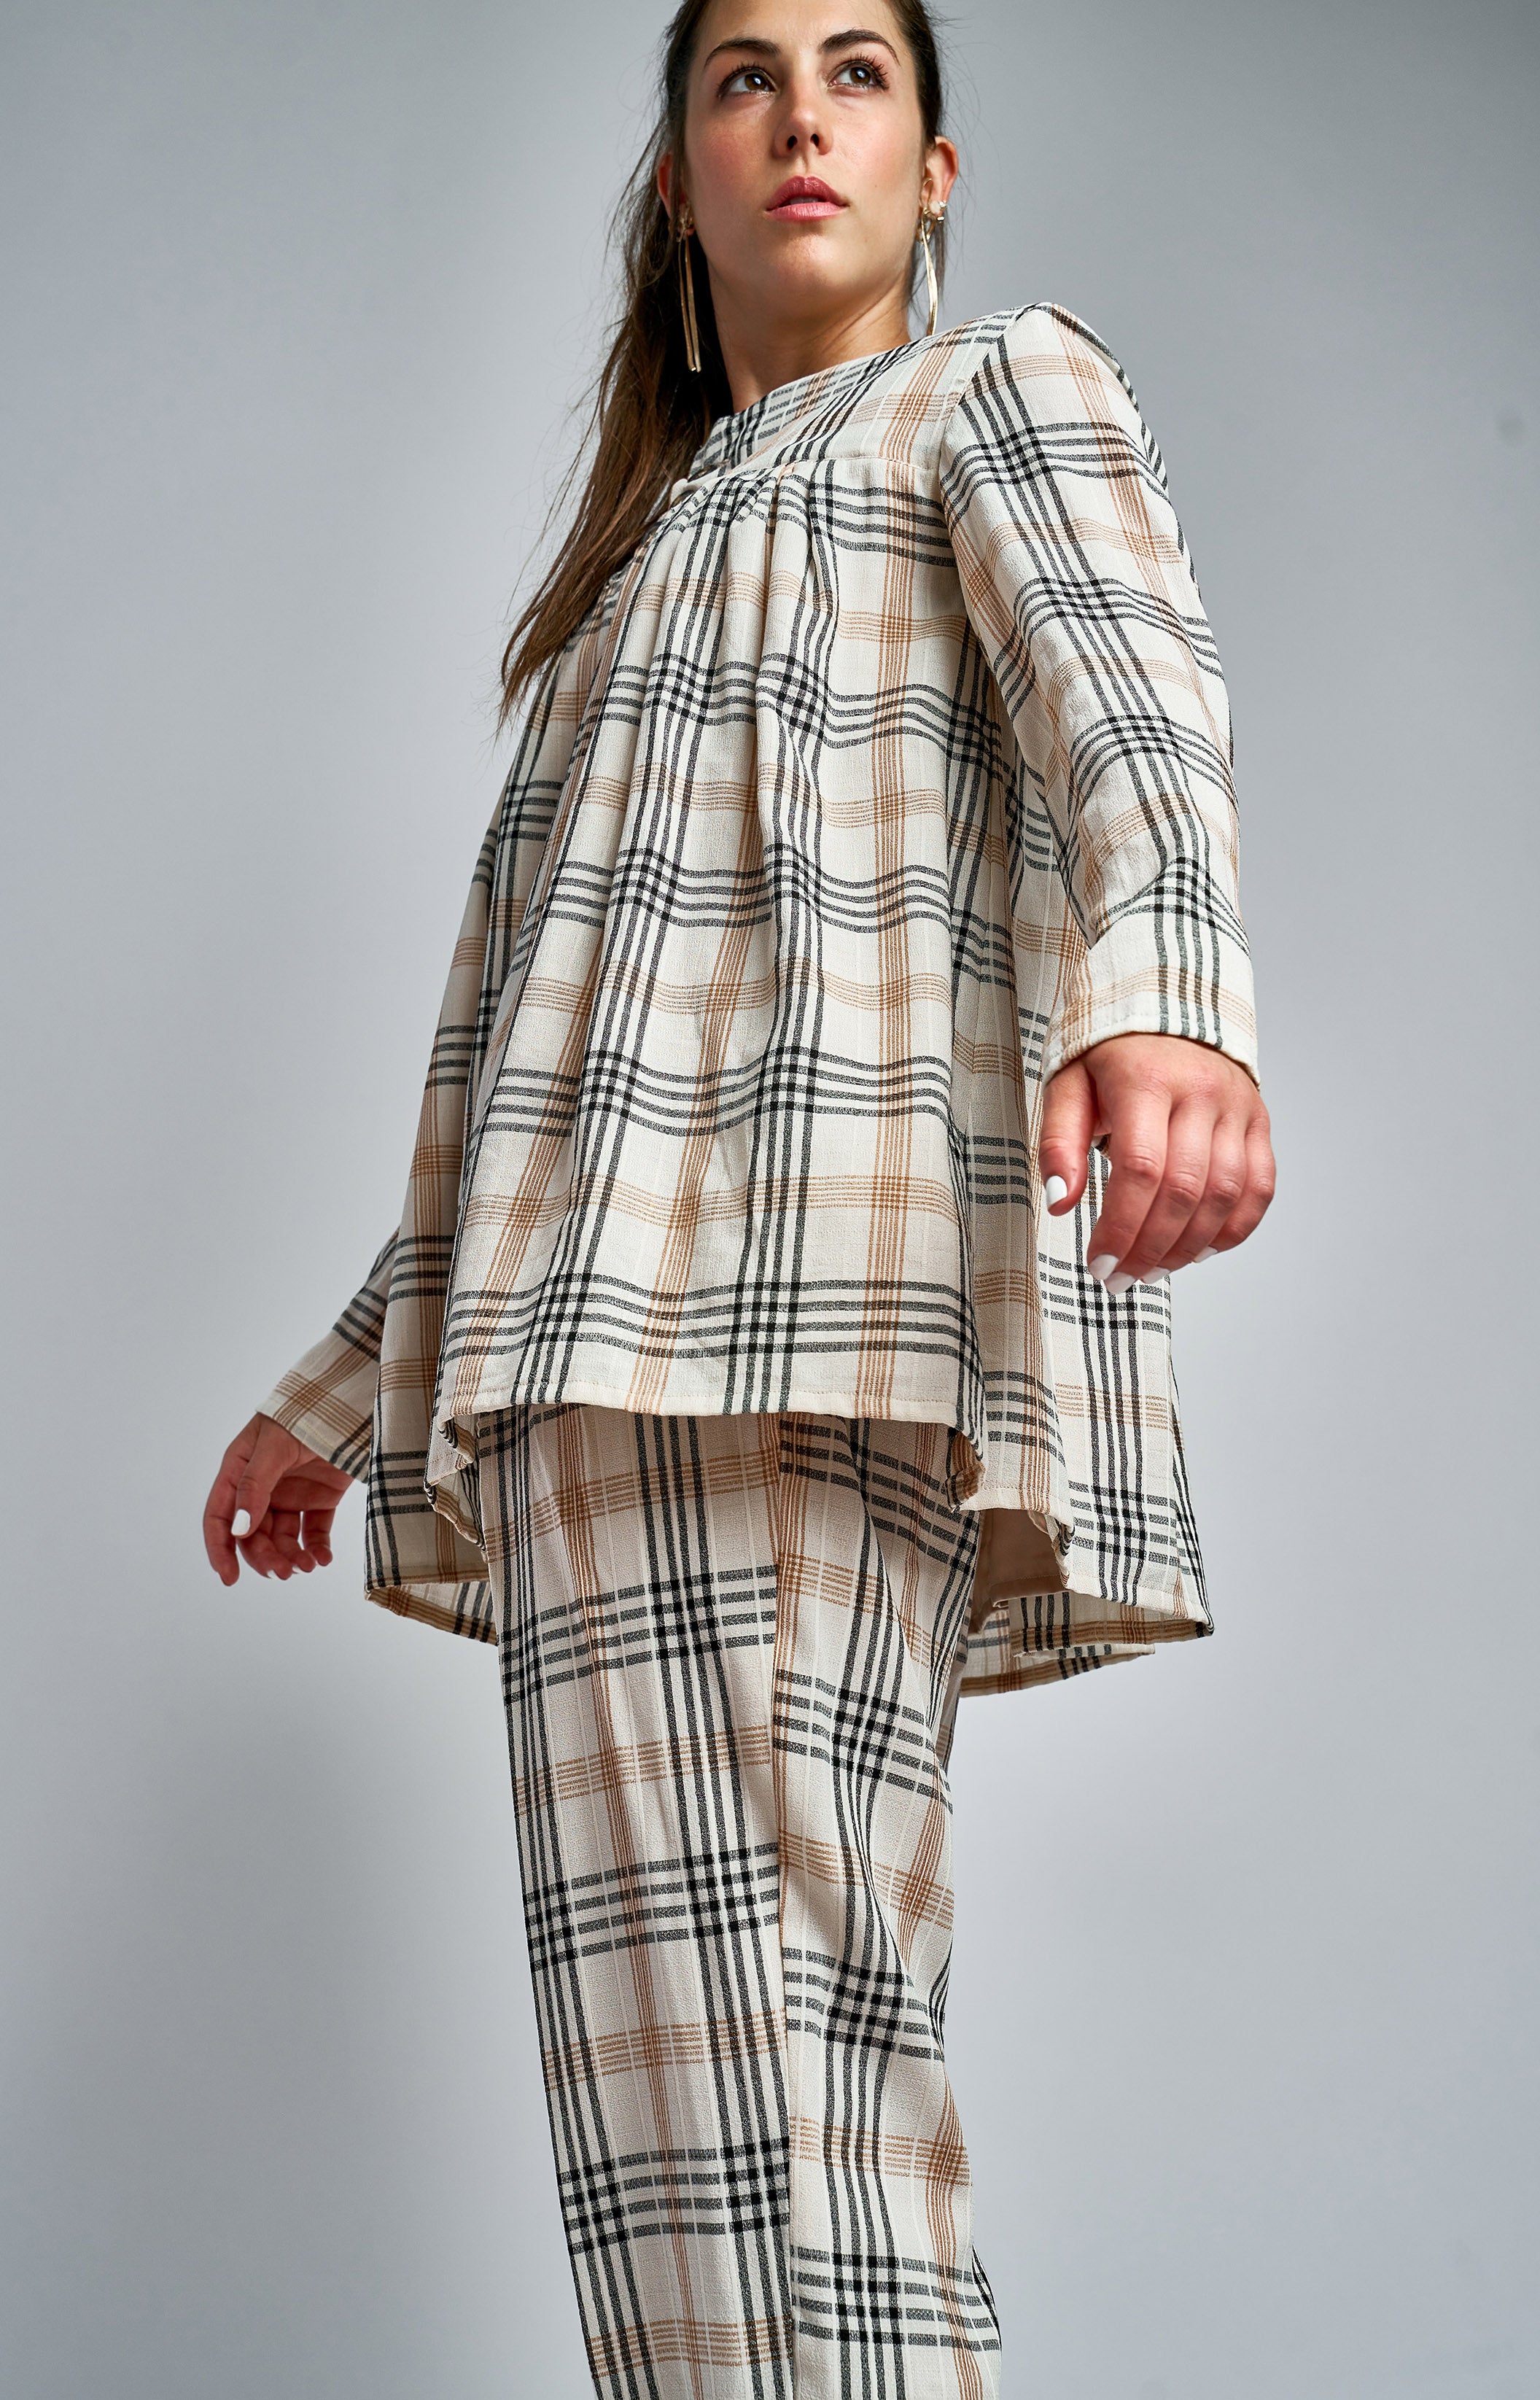 Women’s Tops | Relaxed fit pleated plaid top | Side view | Emily Westenberger